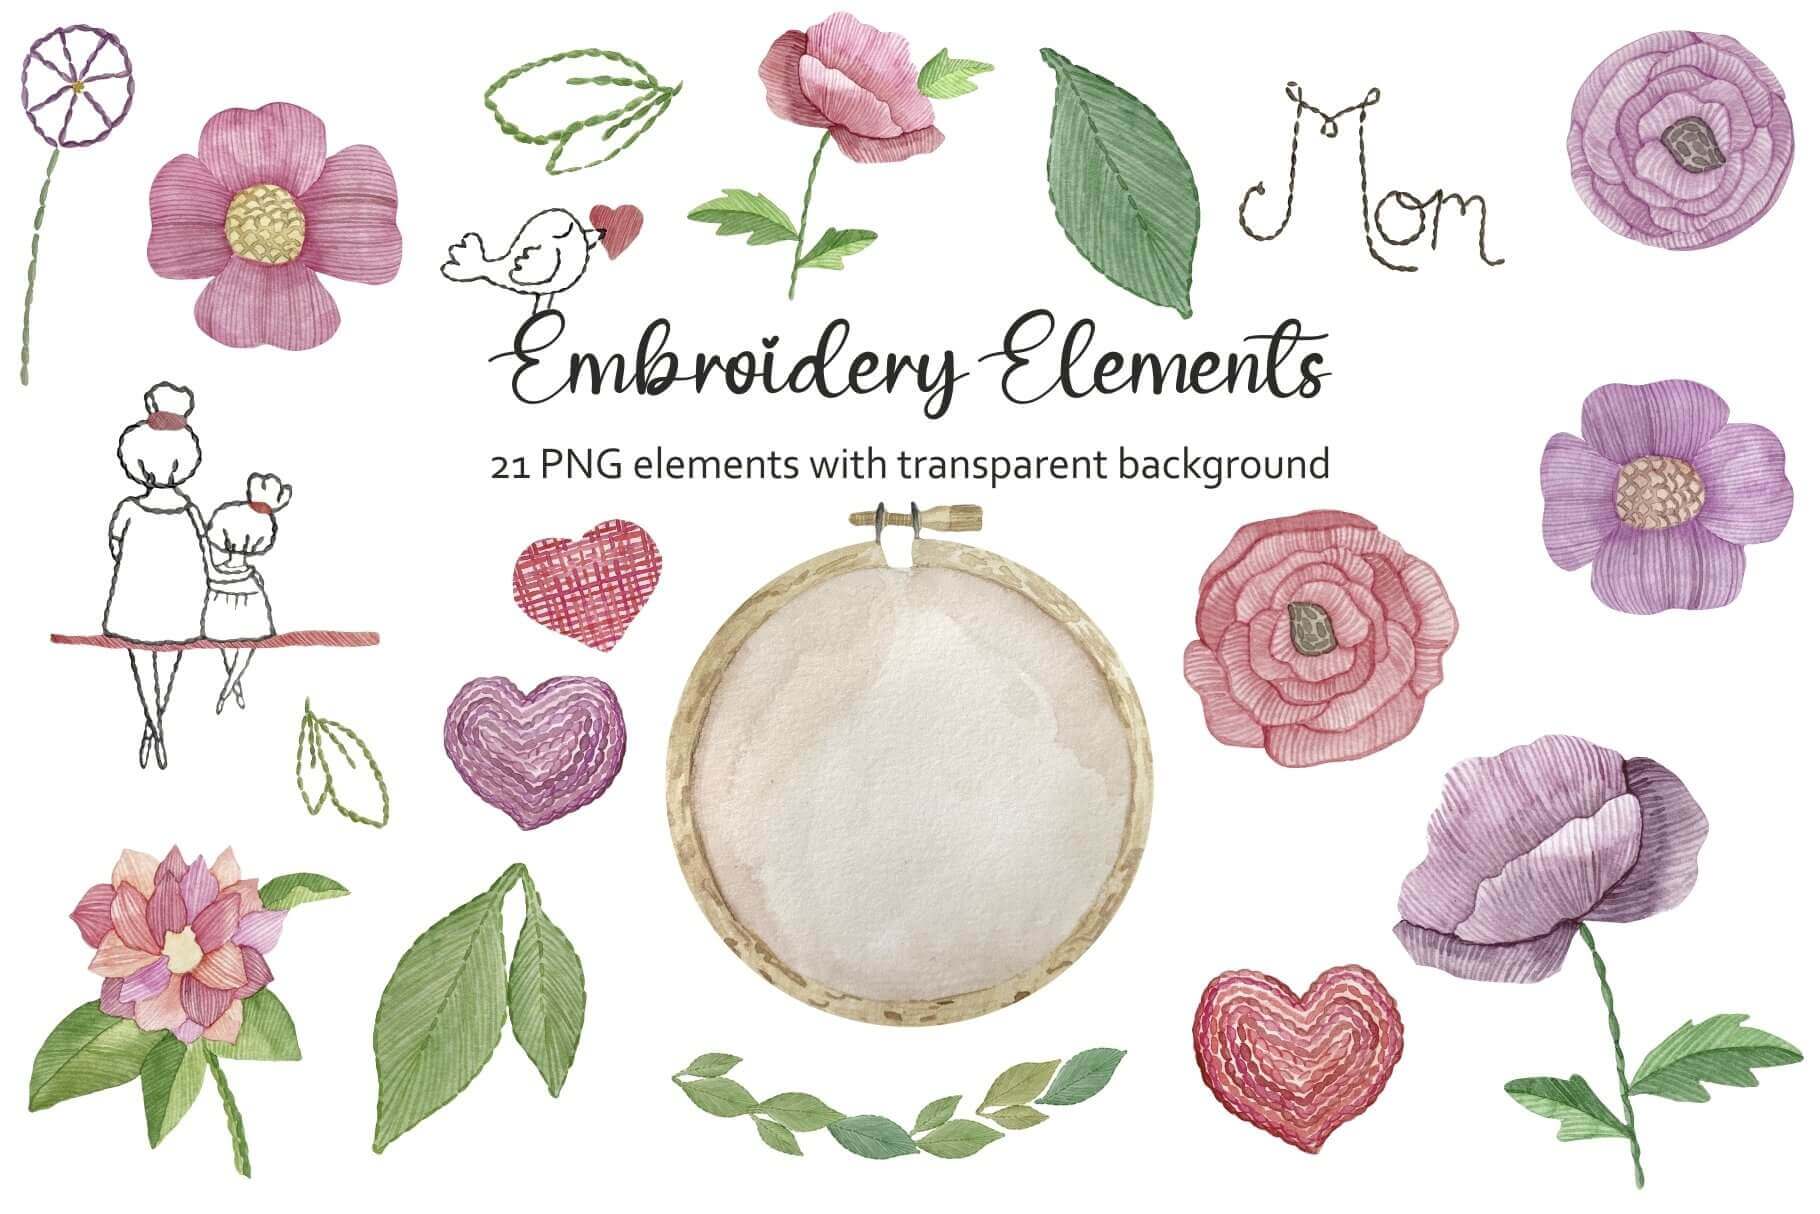 21 PNG embroidery elements with transparent background.